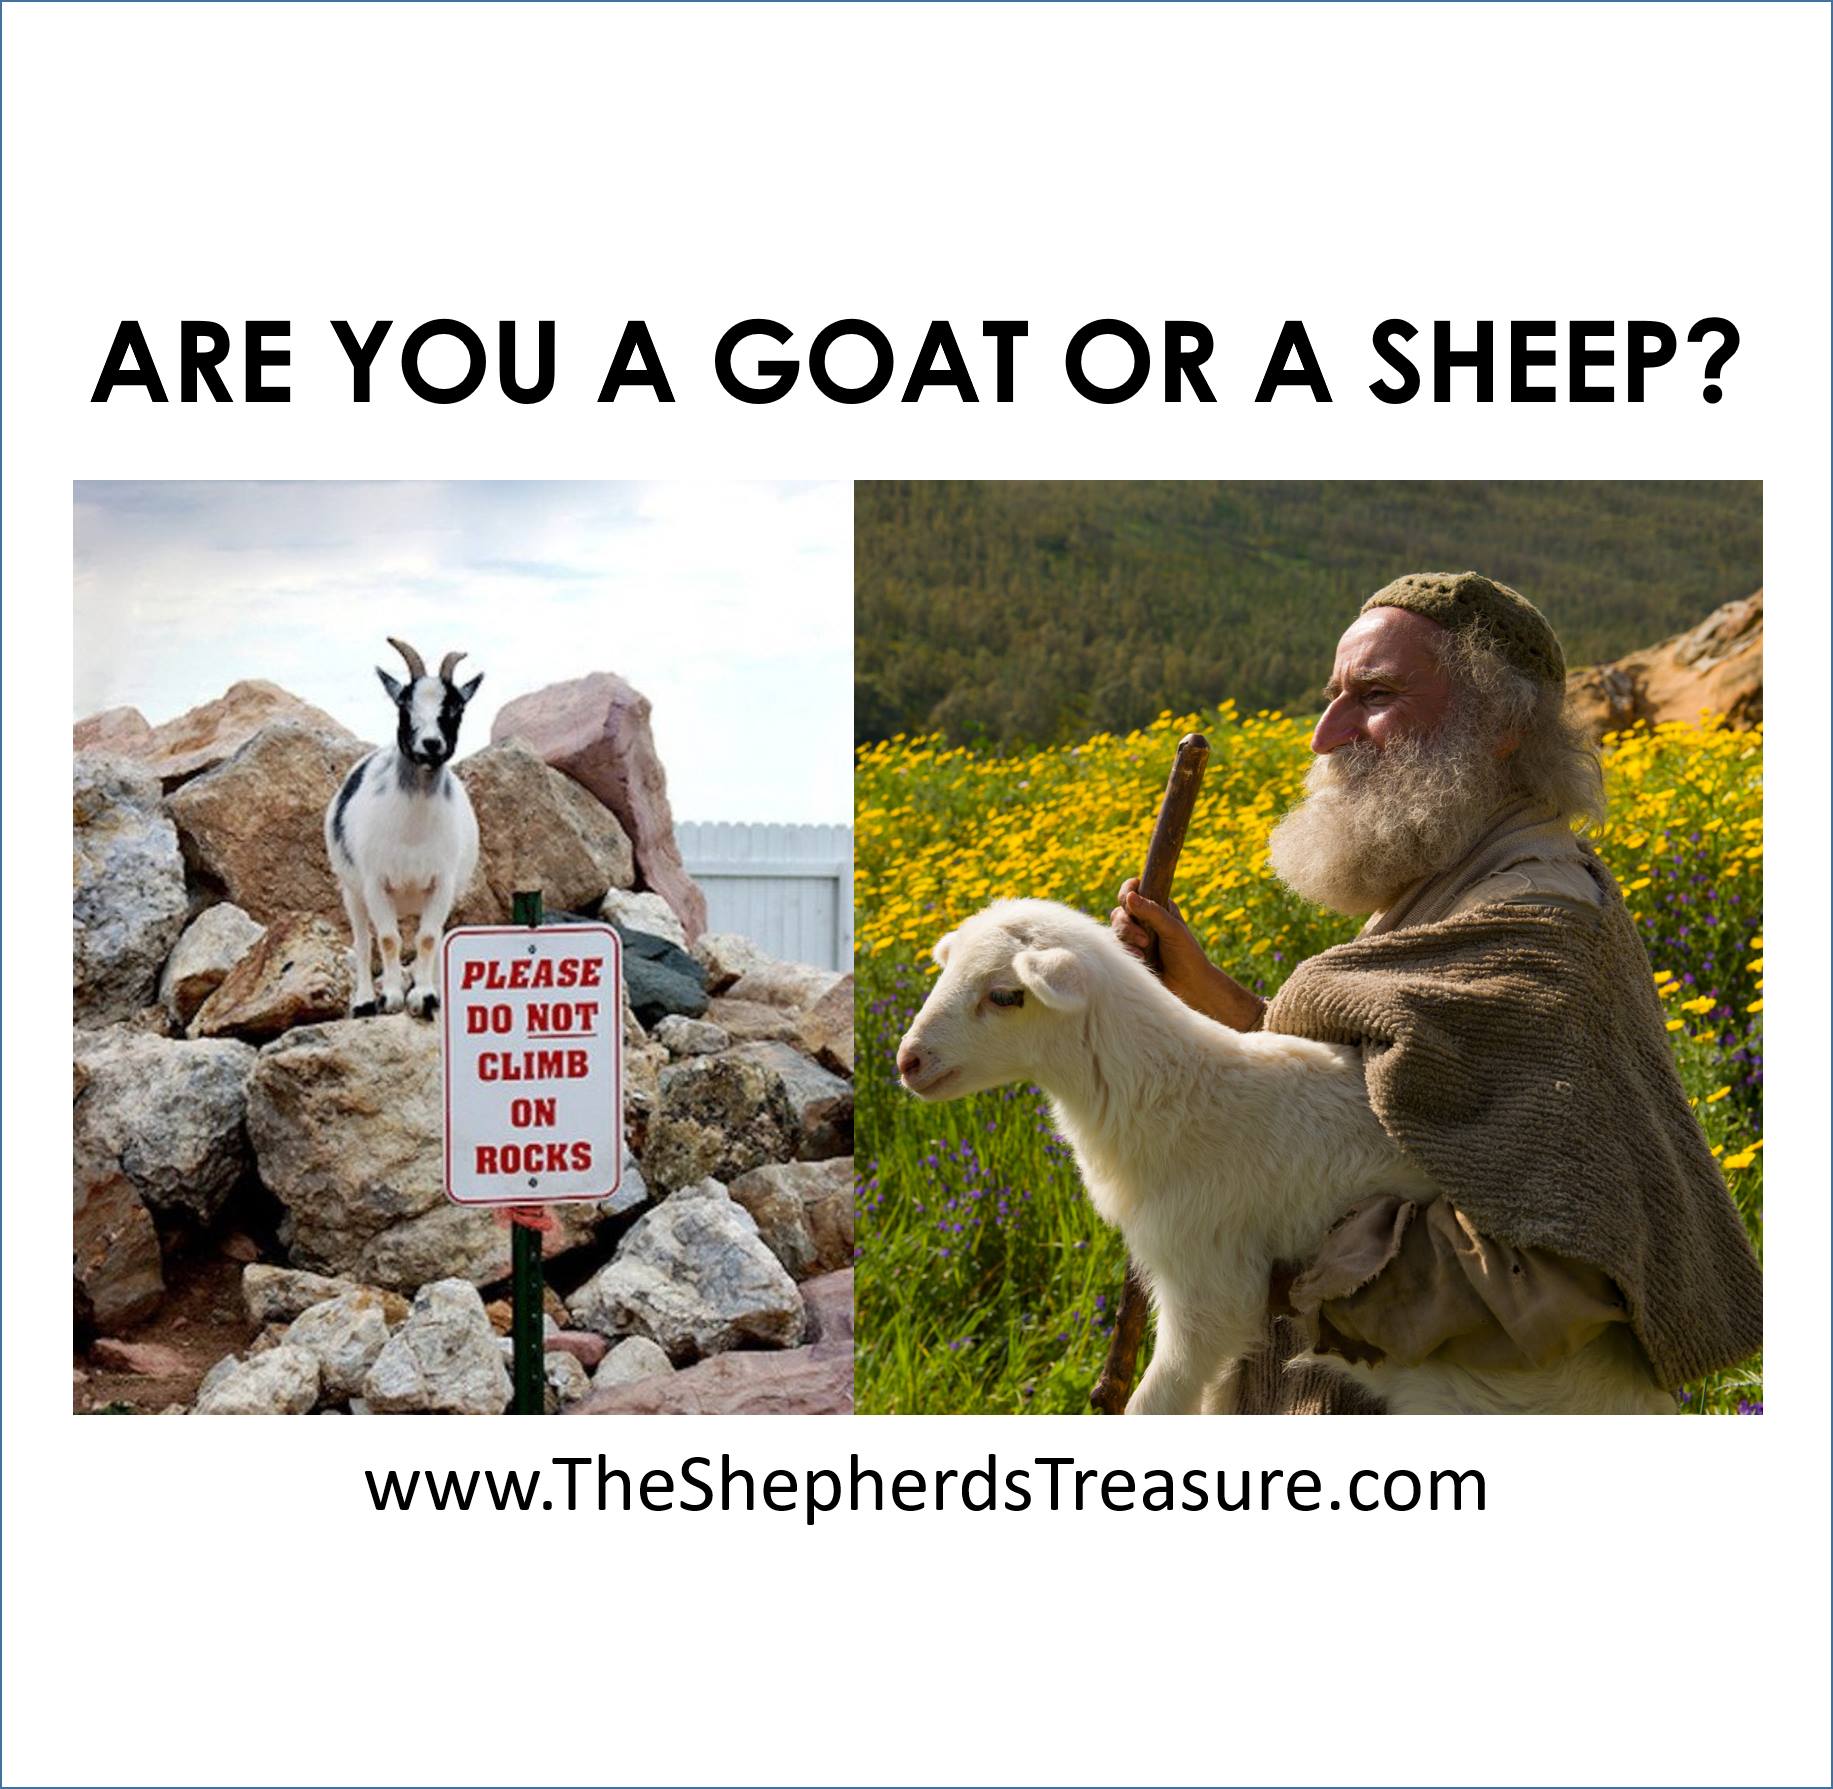 Are you a Goat or a Sheep?